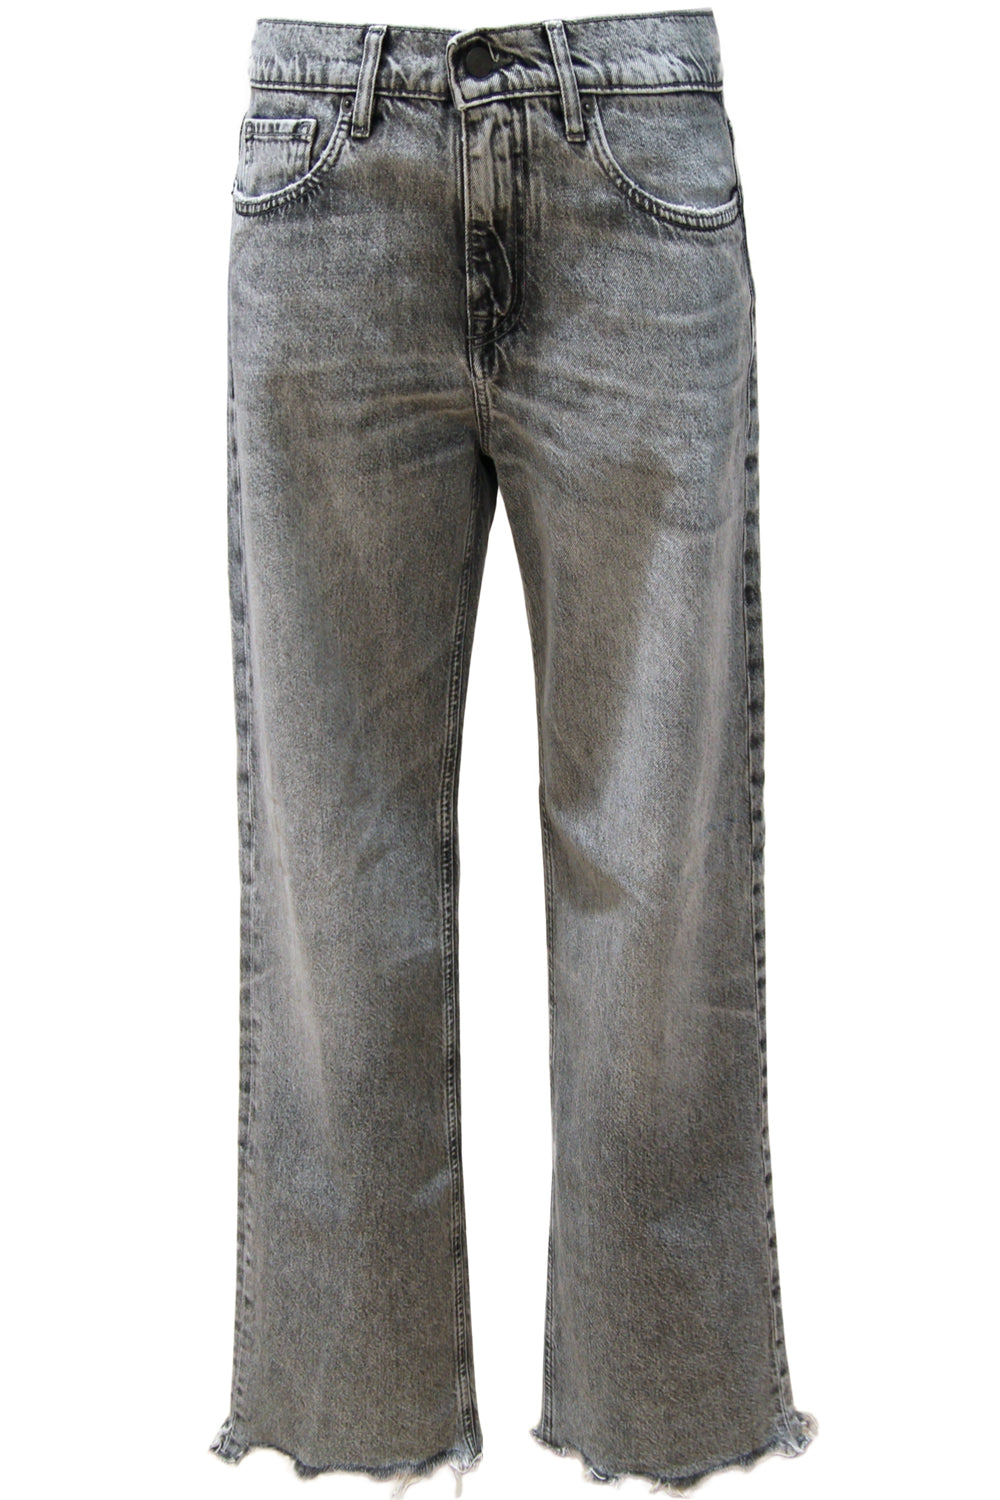 CYCLE Jeans Mila low rise '90s super vintage marble wash